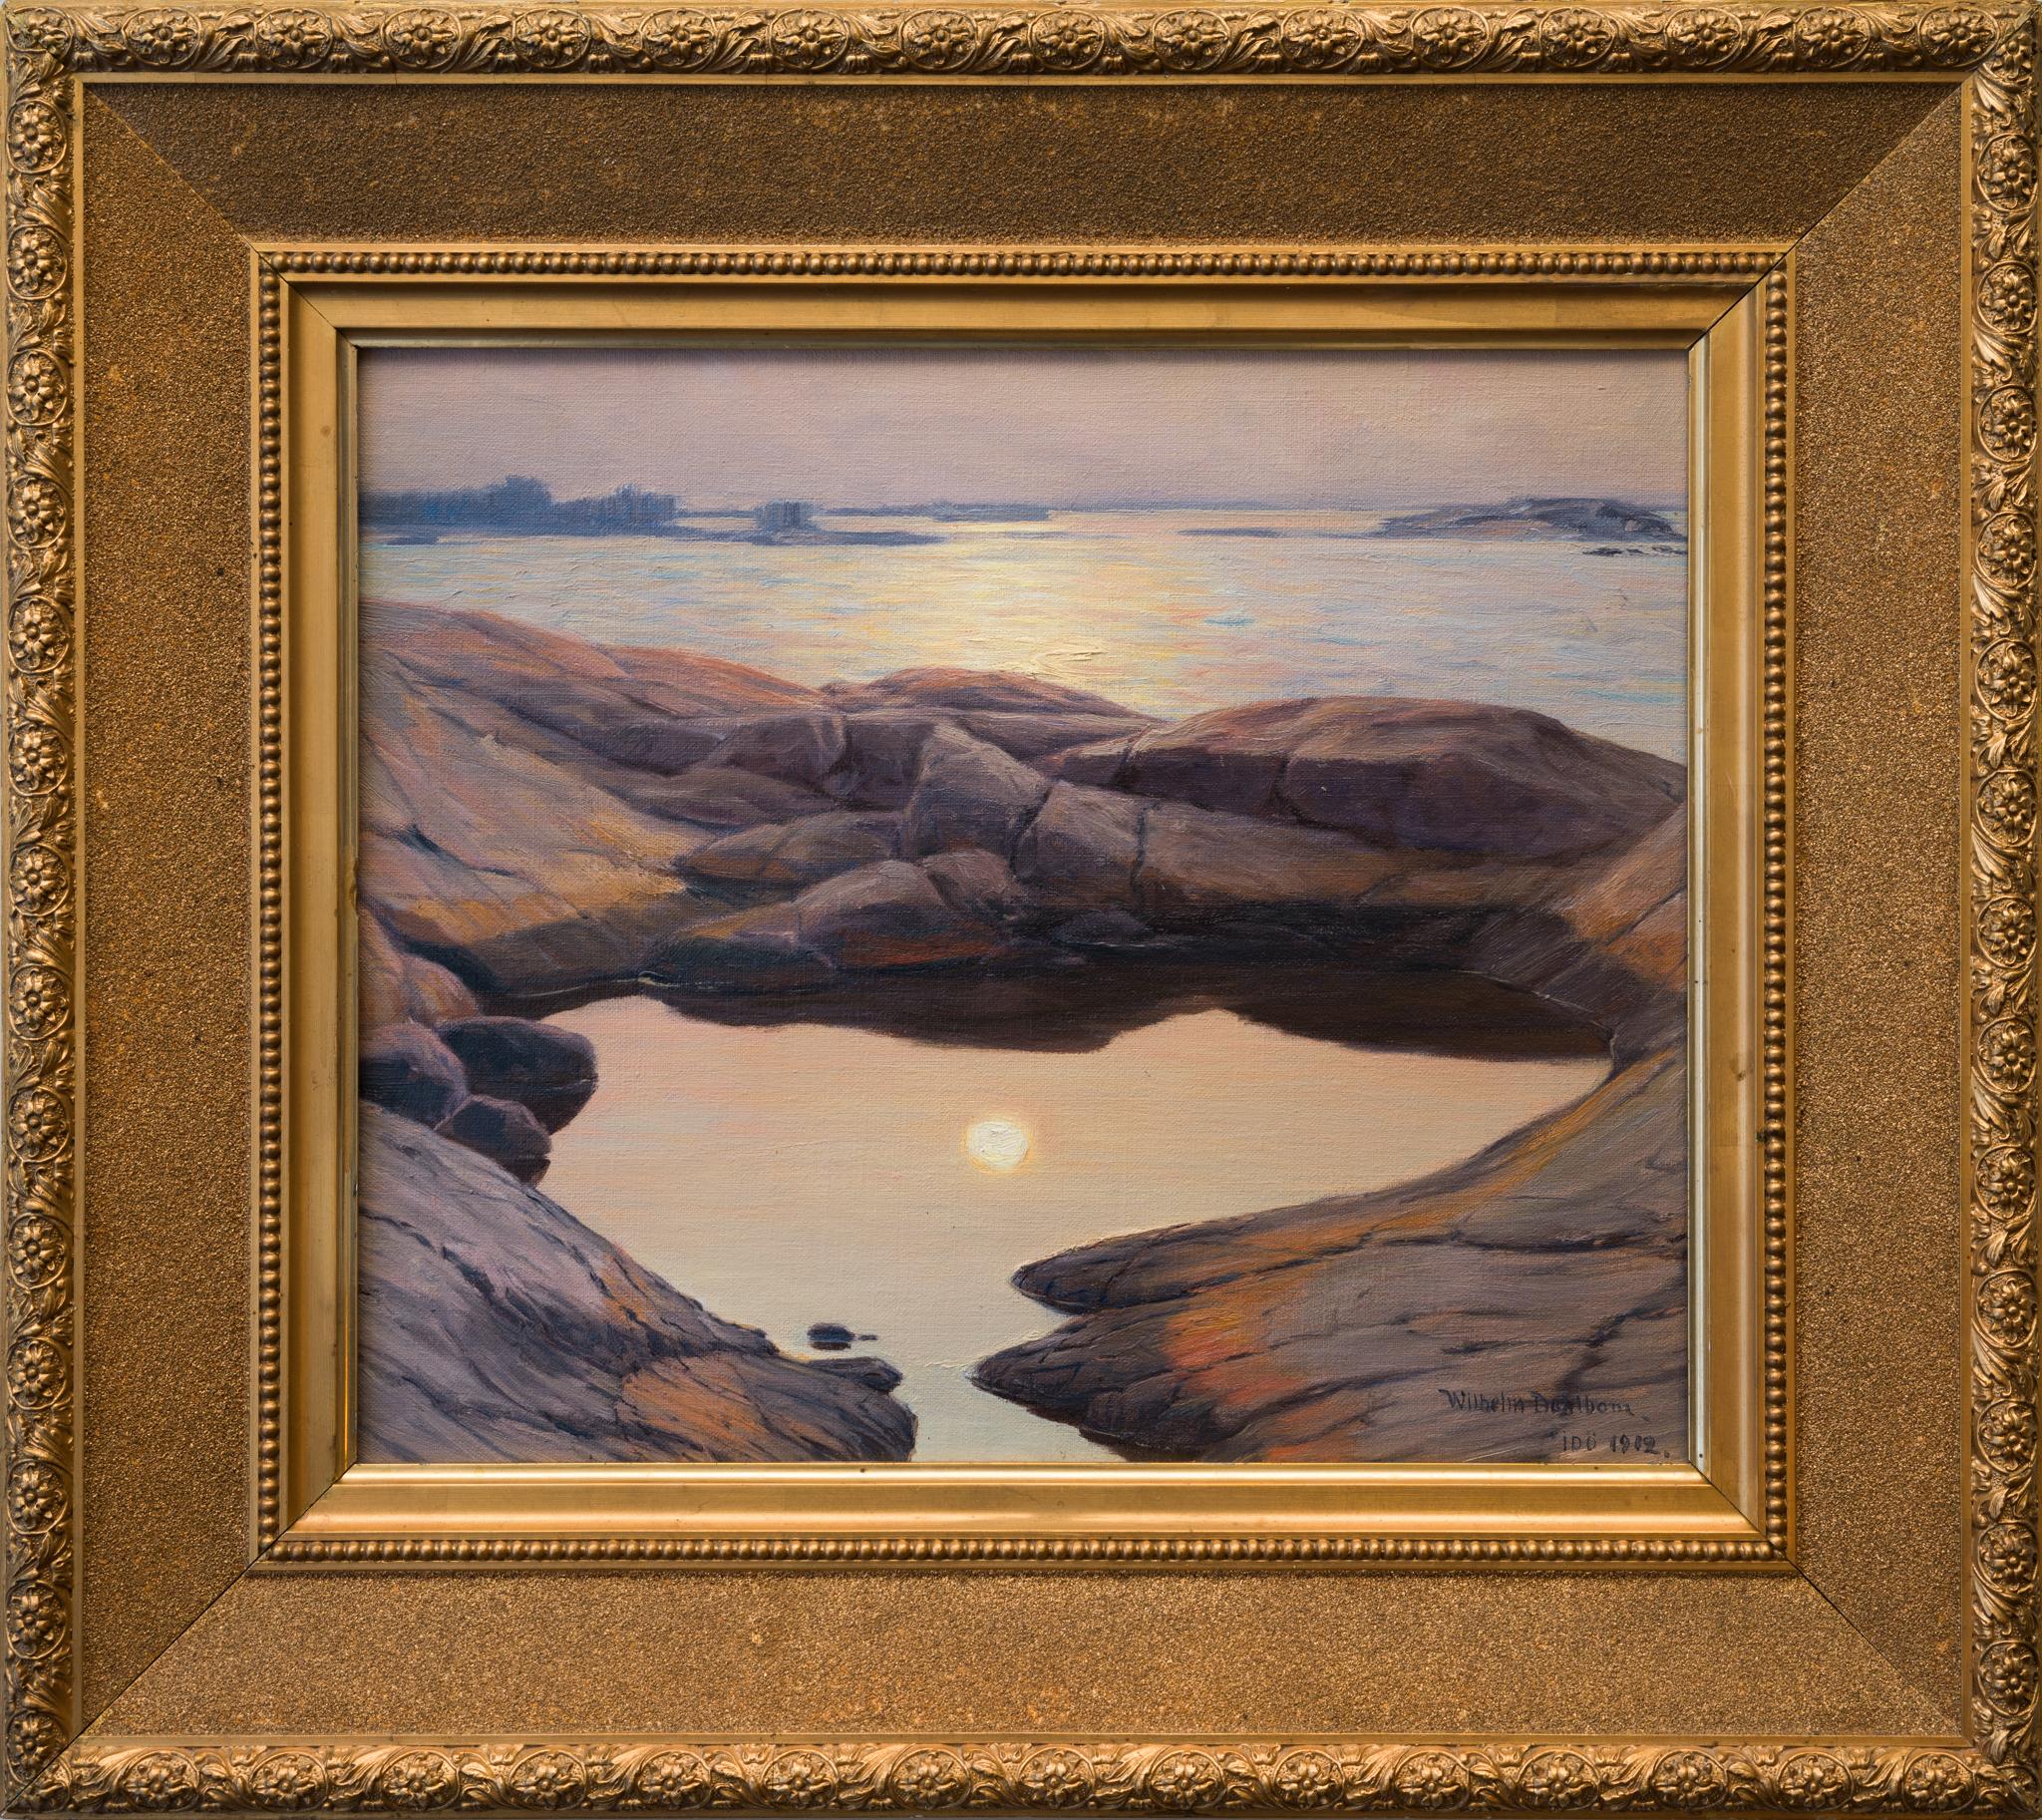 We are pleased to present this exquisite piece by Swedish artist Wilhelm Dahlbom, entitled "Moonlight, Idö, 1912". This work captures the serene reflection of moonlight on water, the scene unfolding on a rugged shoreline where the relentless caress